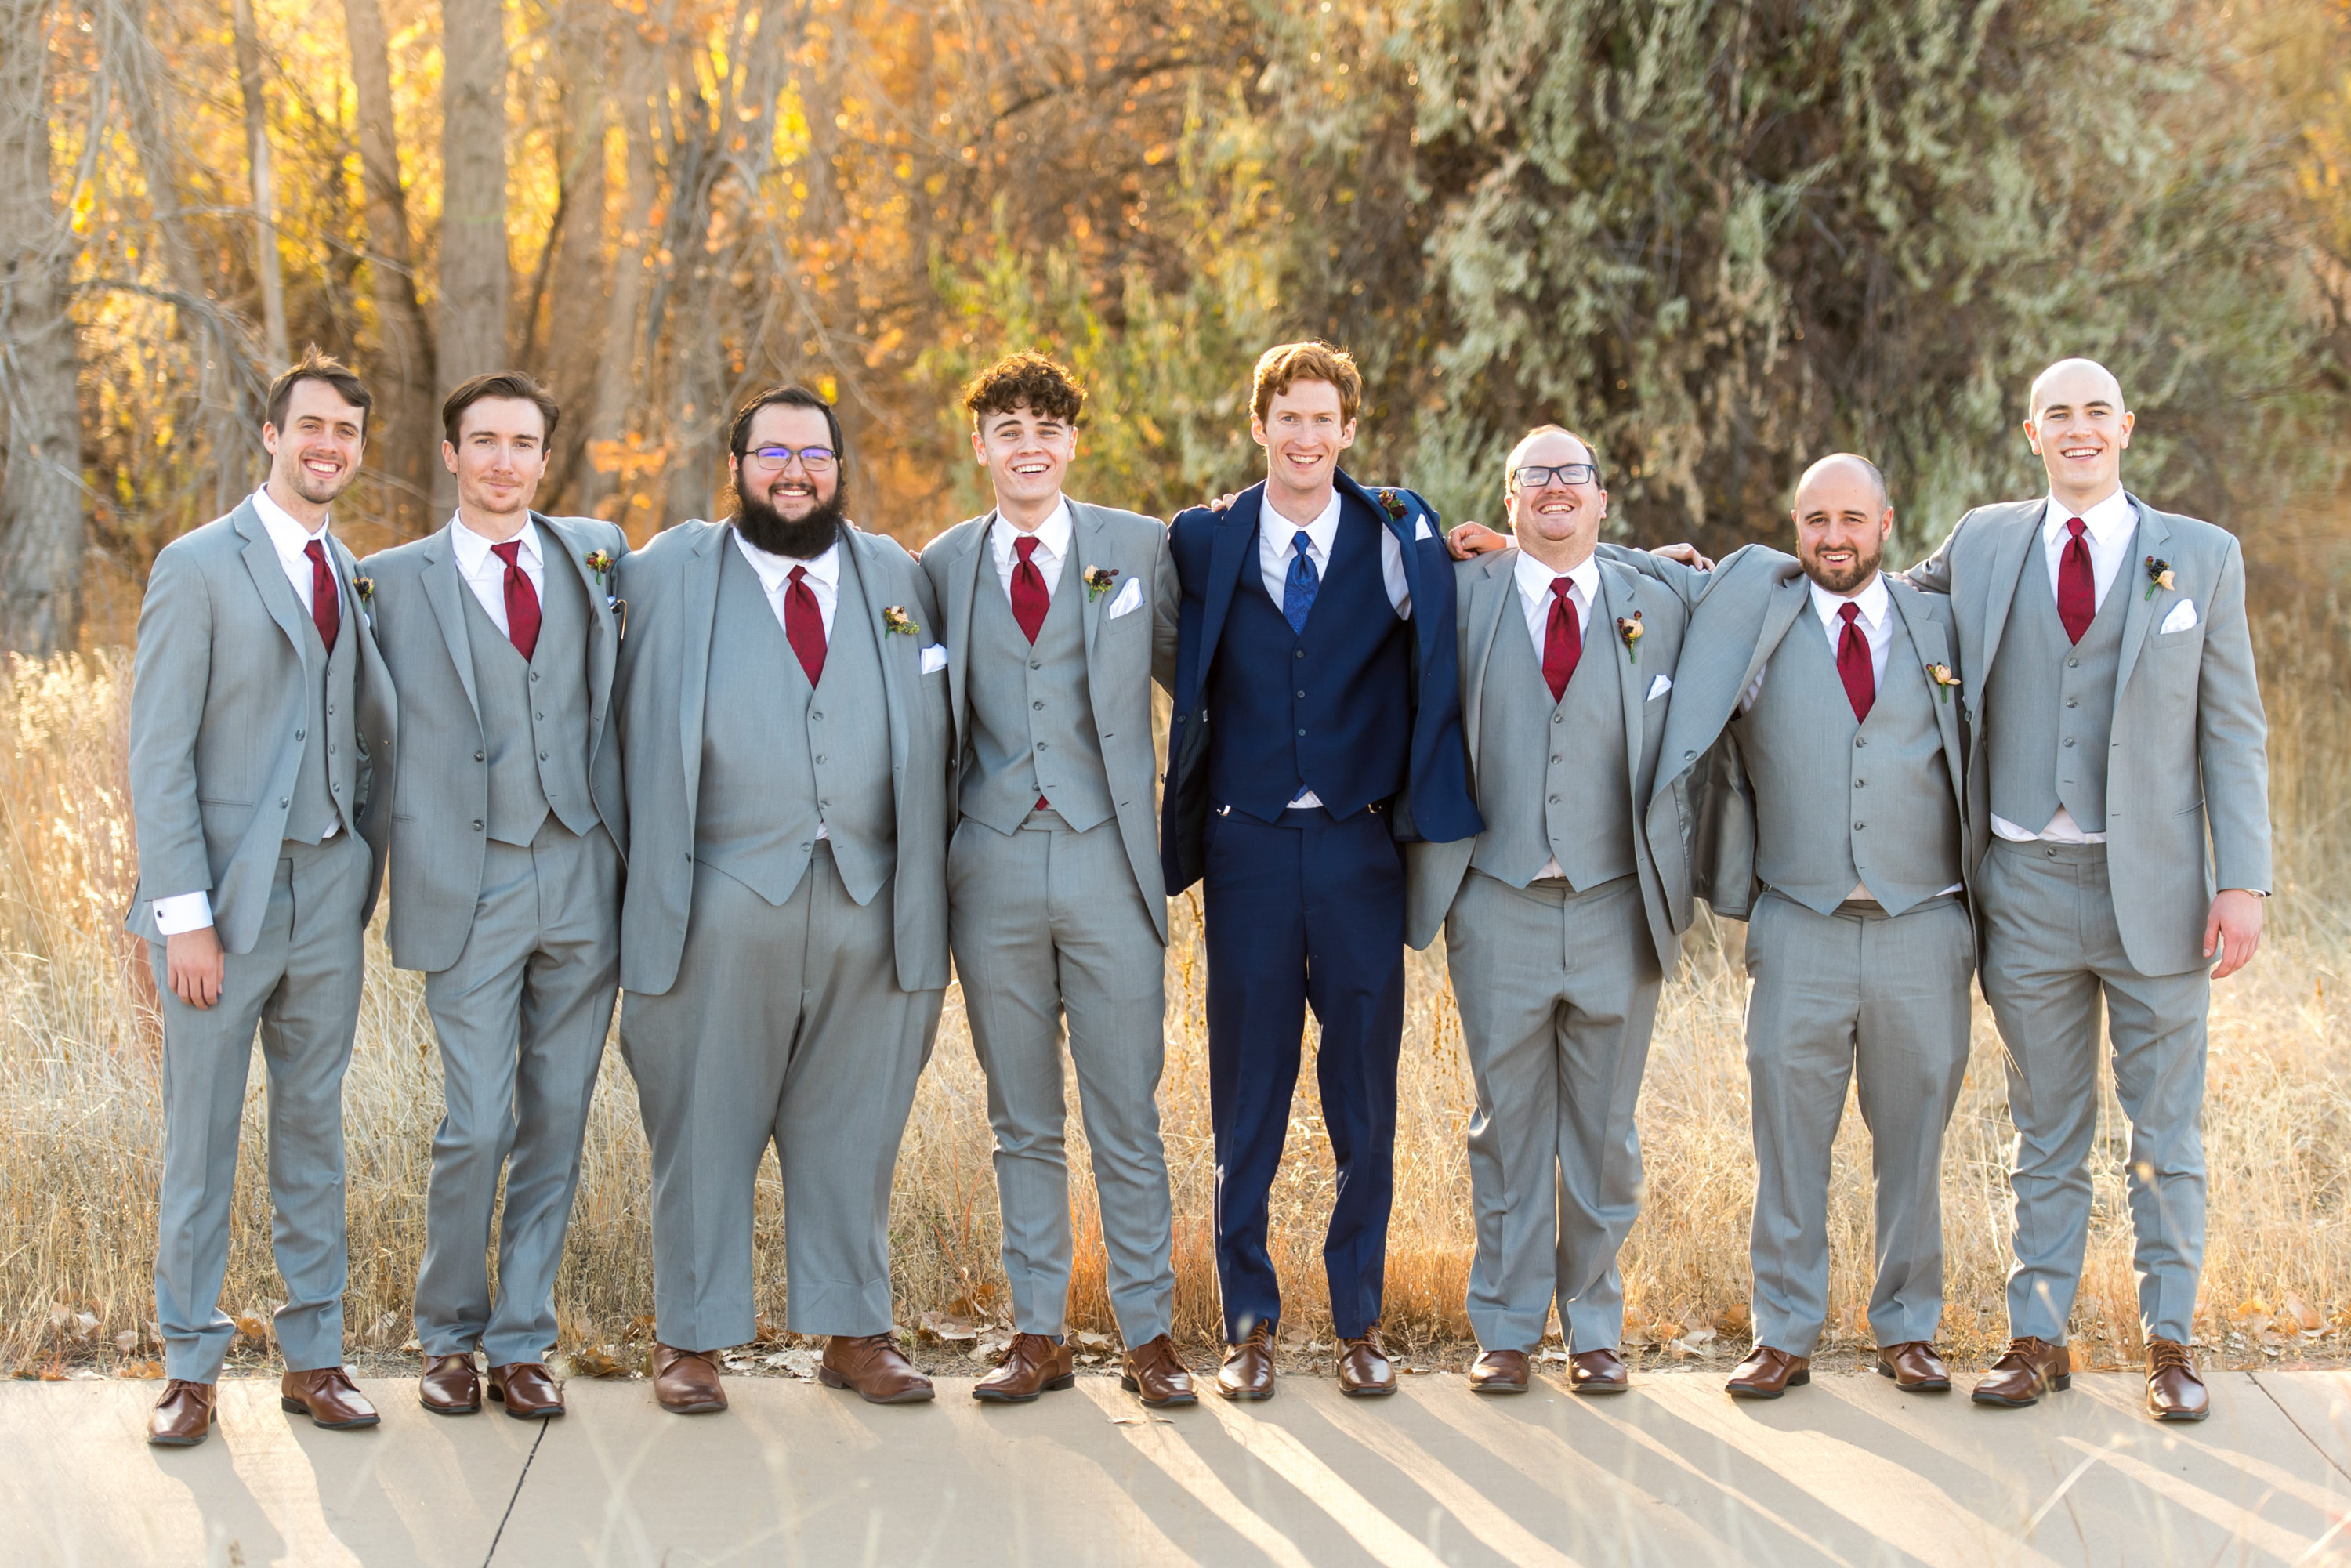 Groom poses with his groomsmen at Cherry Creek State Park in Aurora, Colorado.